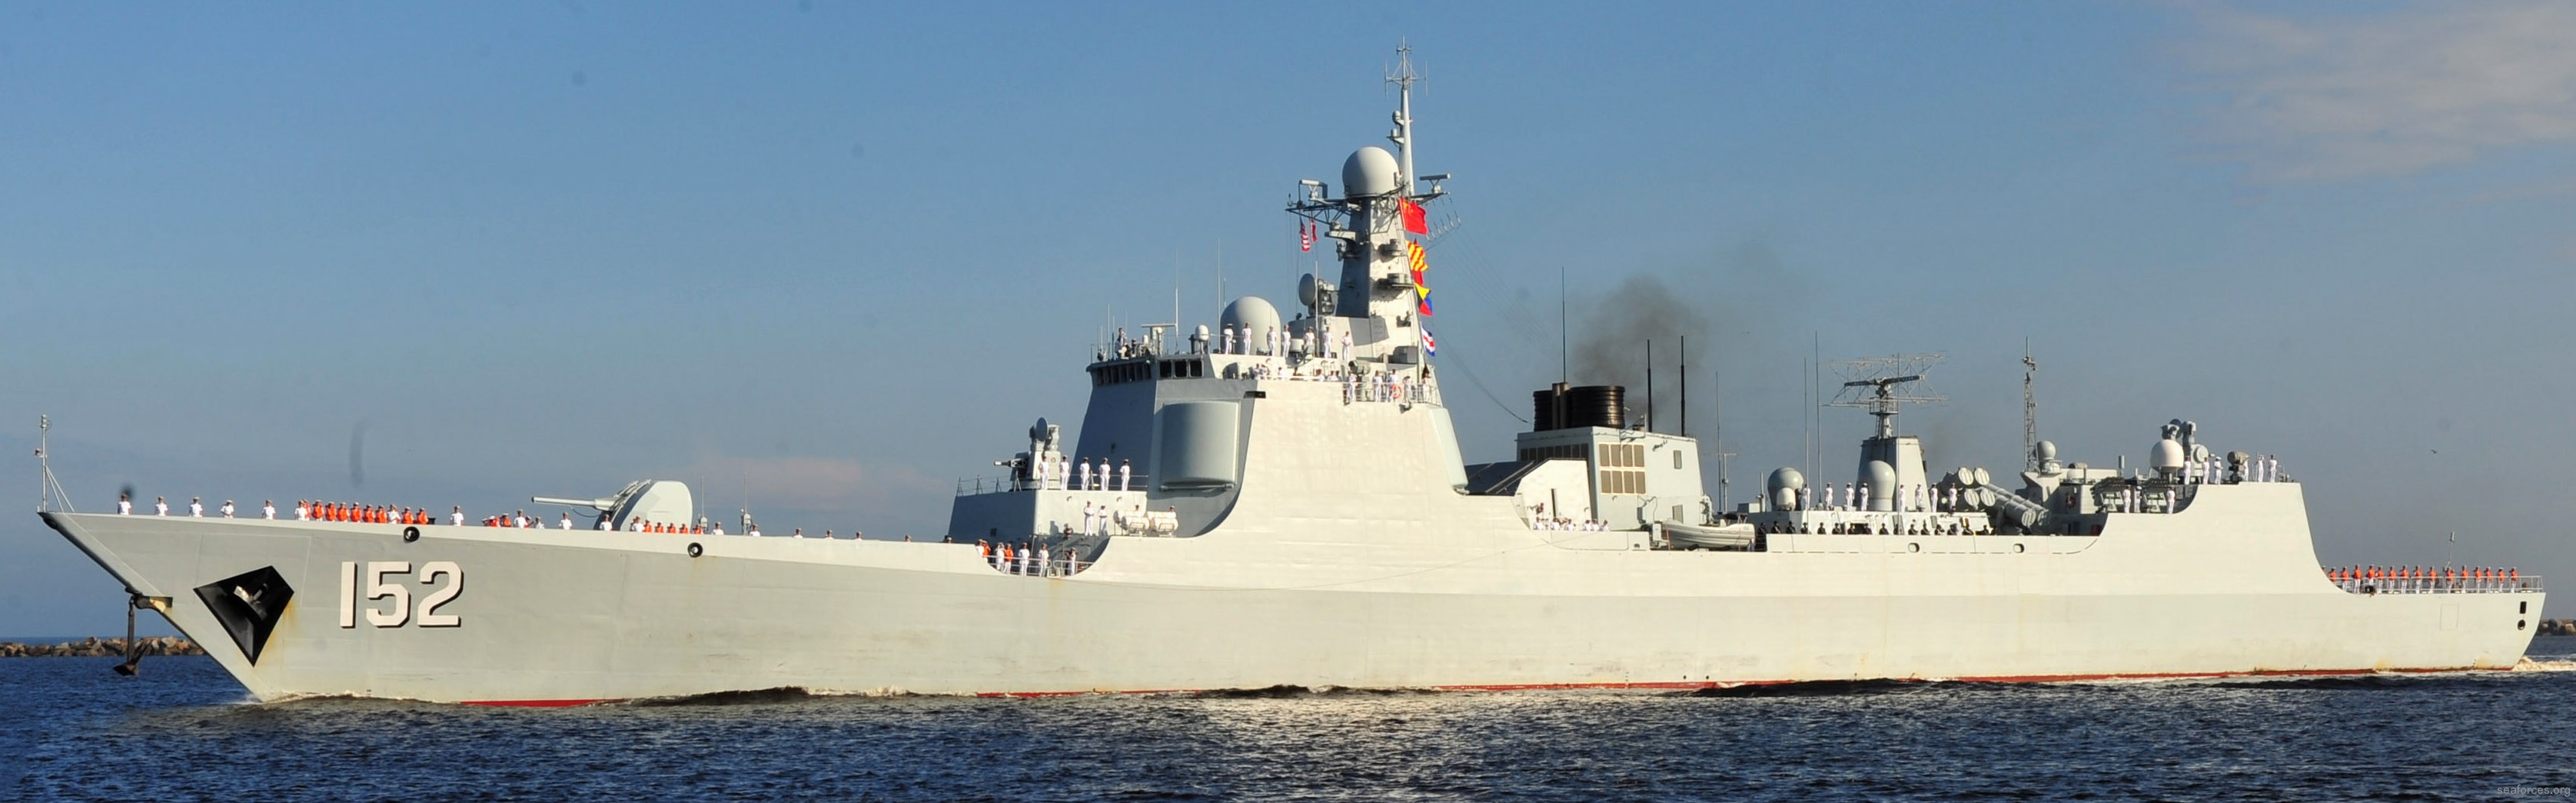 ddg-152 plans jinan type 052c class guided missile destroyer china people's liberation army navy 04